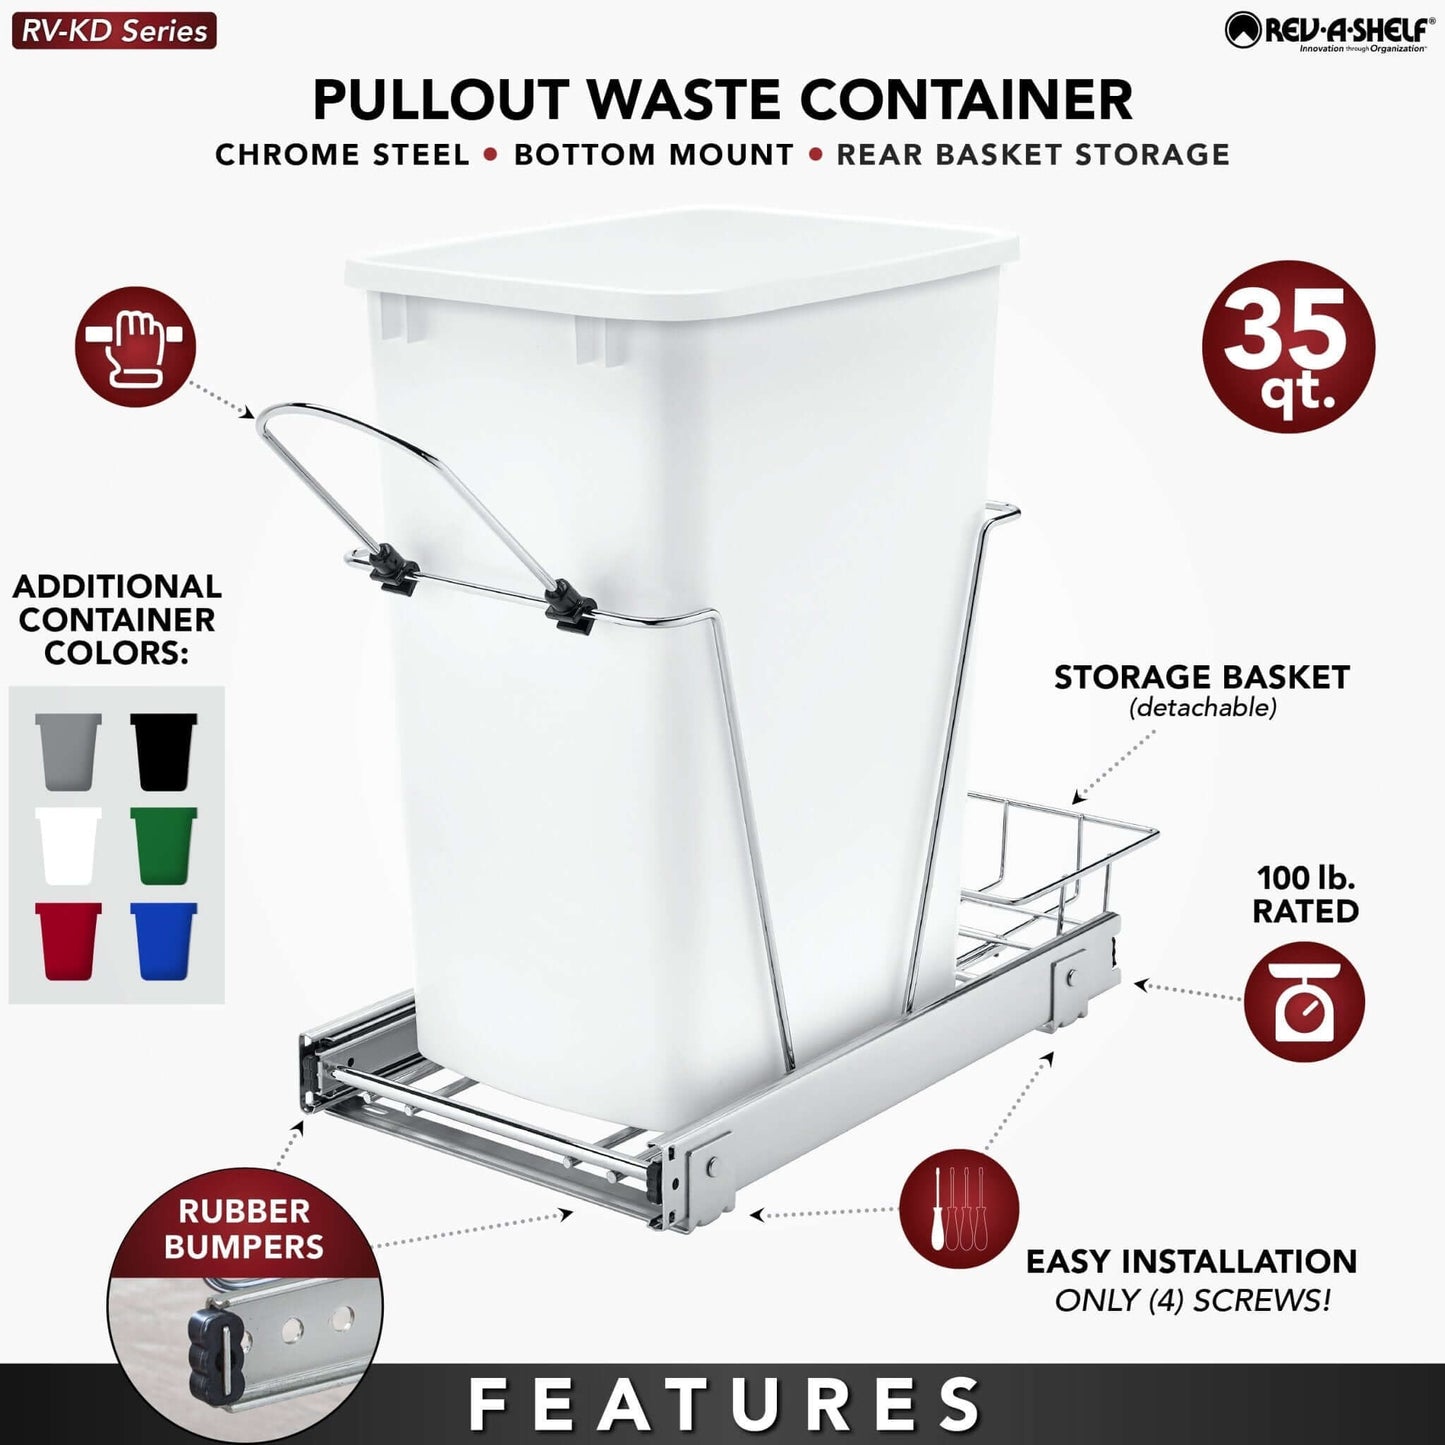 Rev-A-Shelf - Chrome Steel Pull Out Waste/Trash Container w/Rear Basket Storage - RV-12KD-17C S